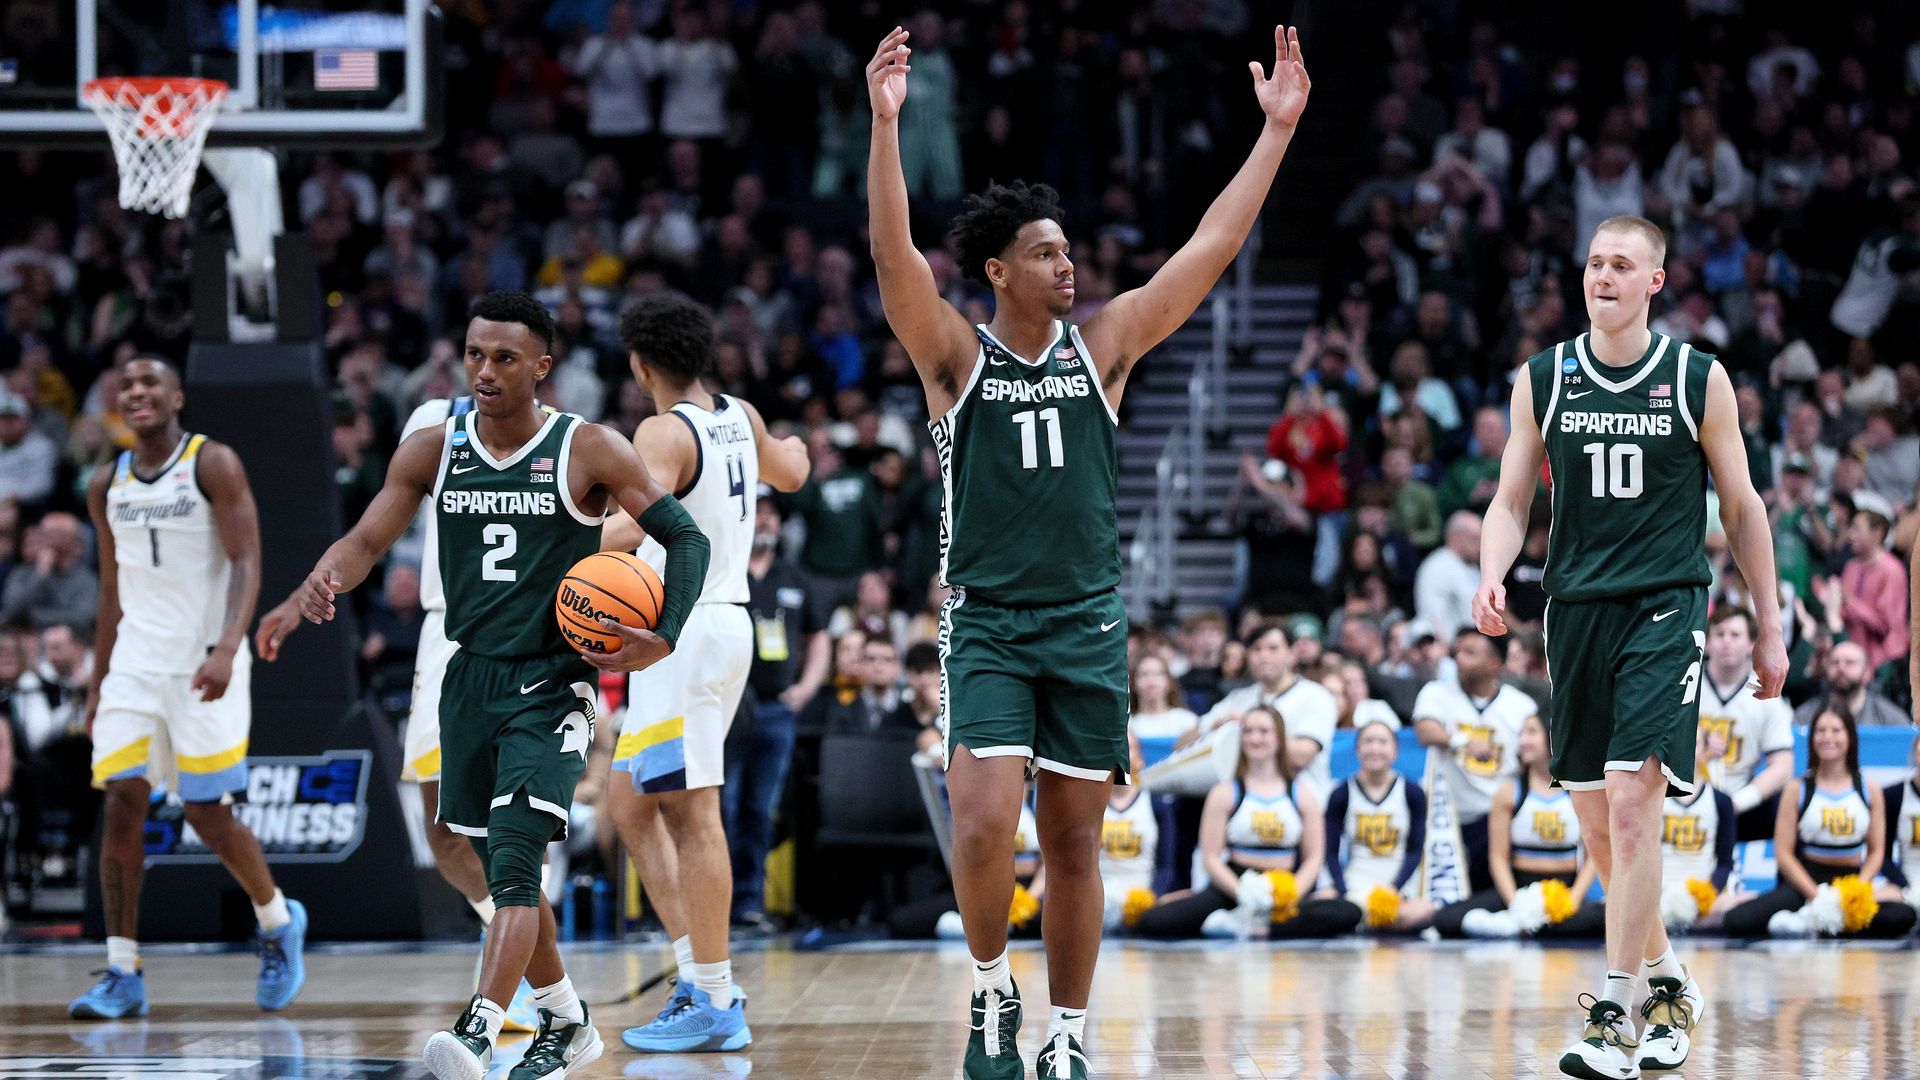 A.J. Hoggard, center, celebrates a play during MSU's win over Marquette.